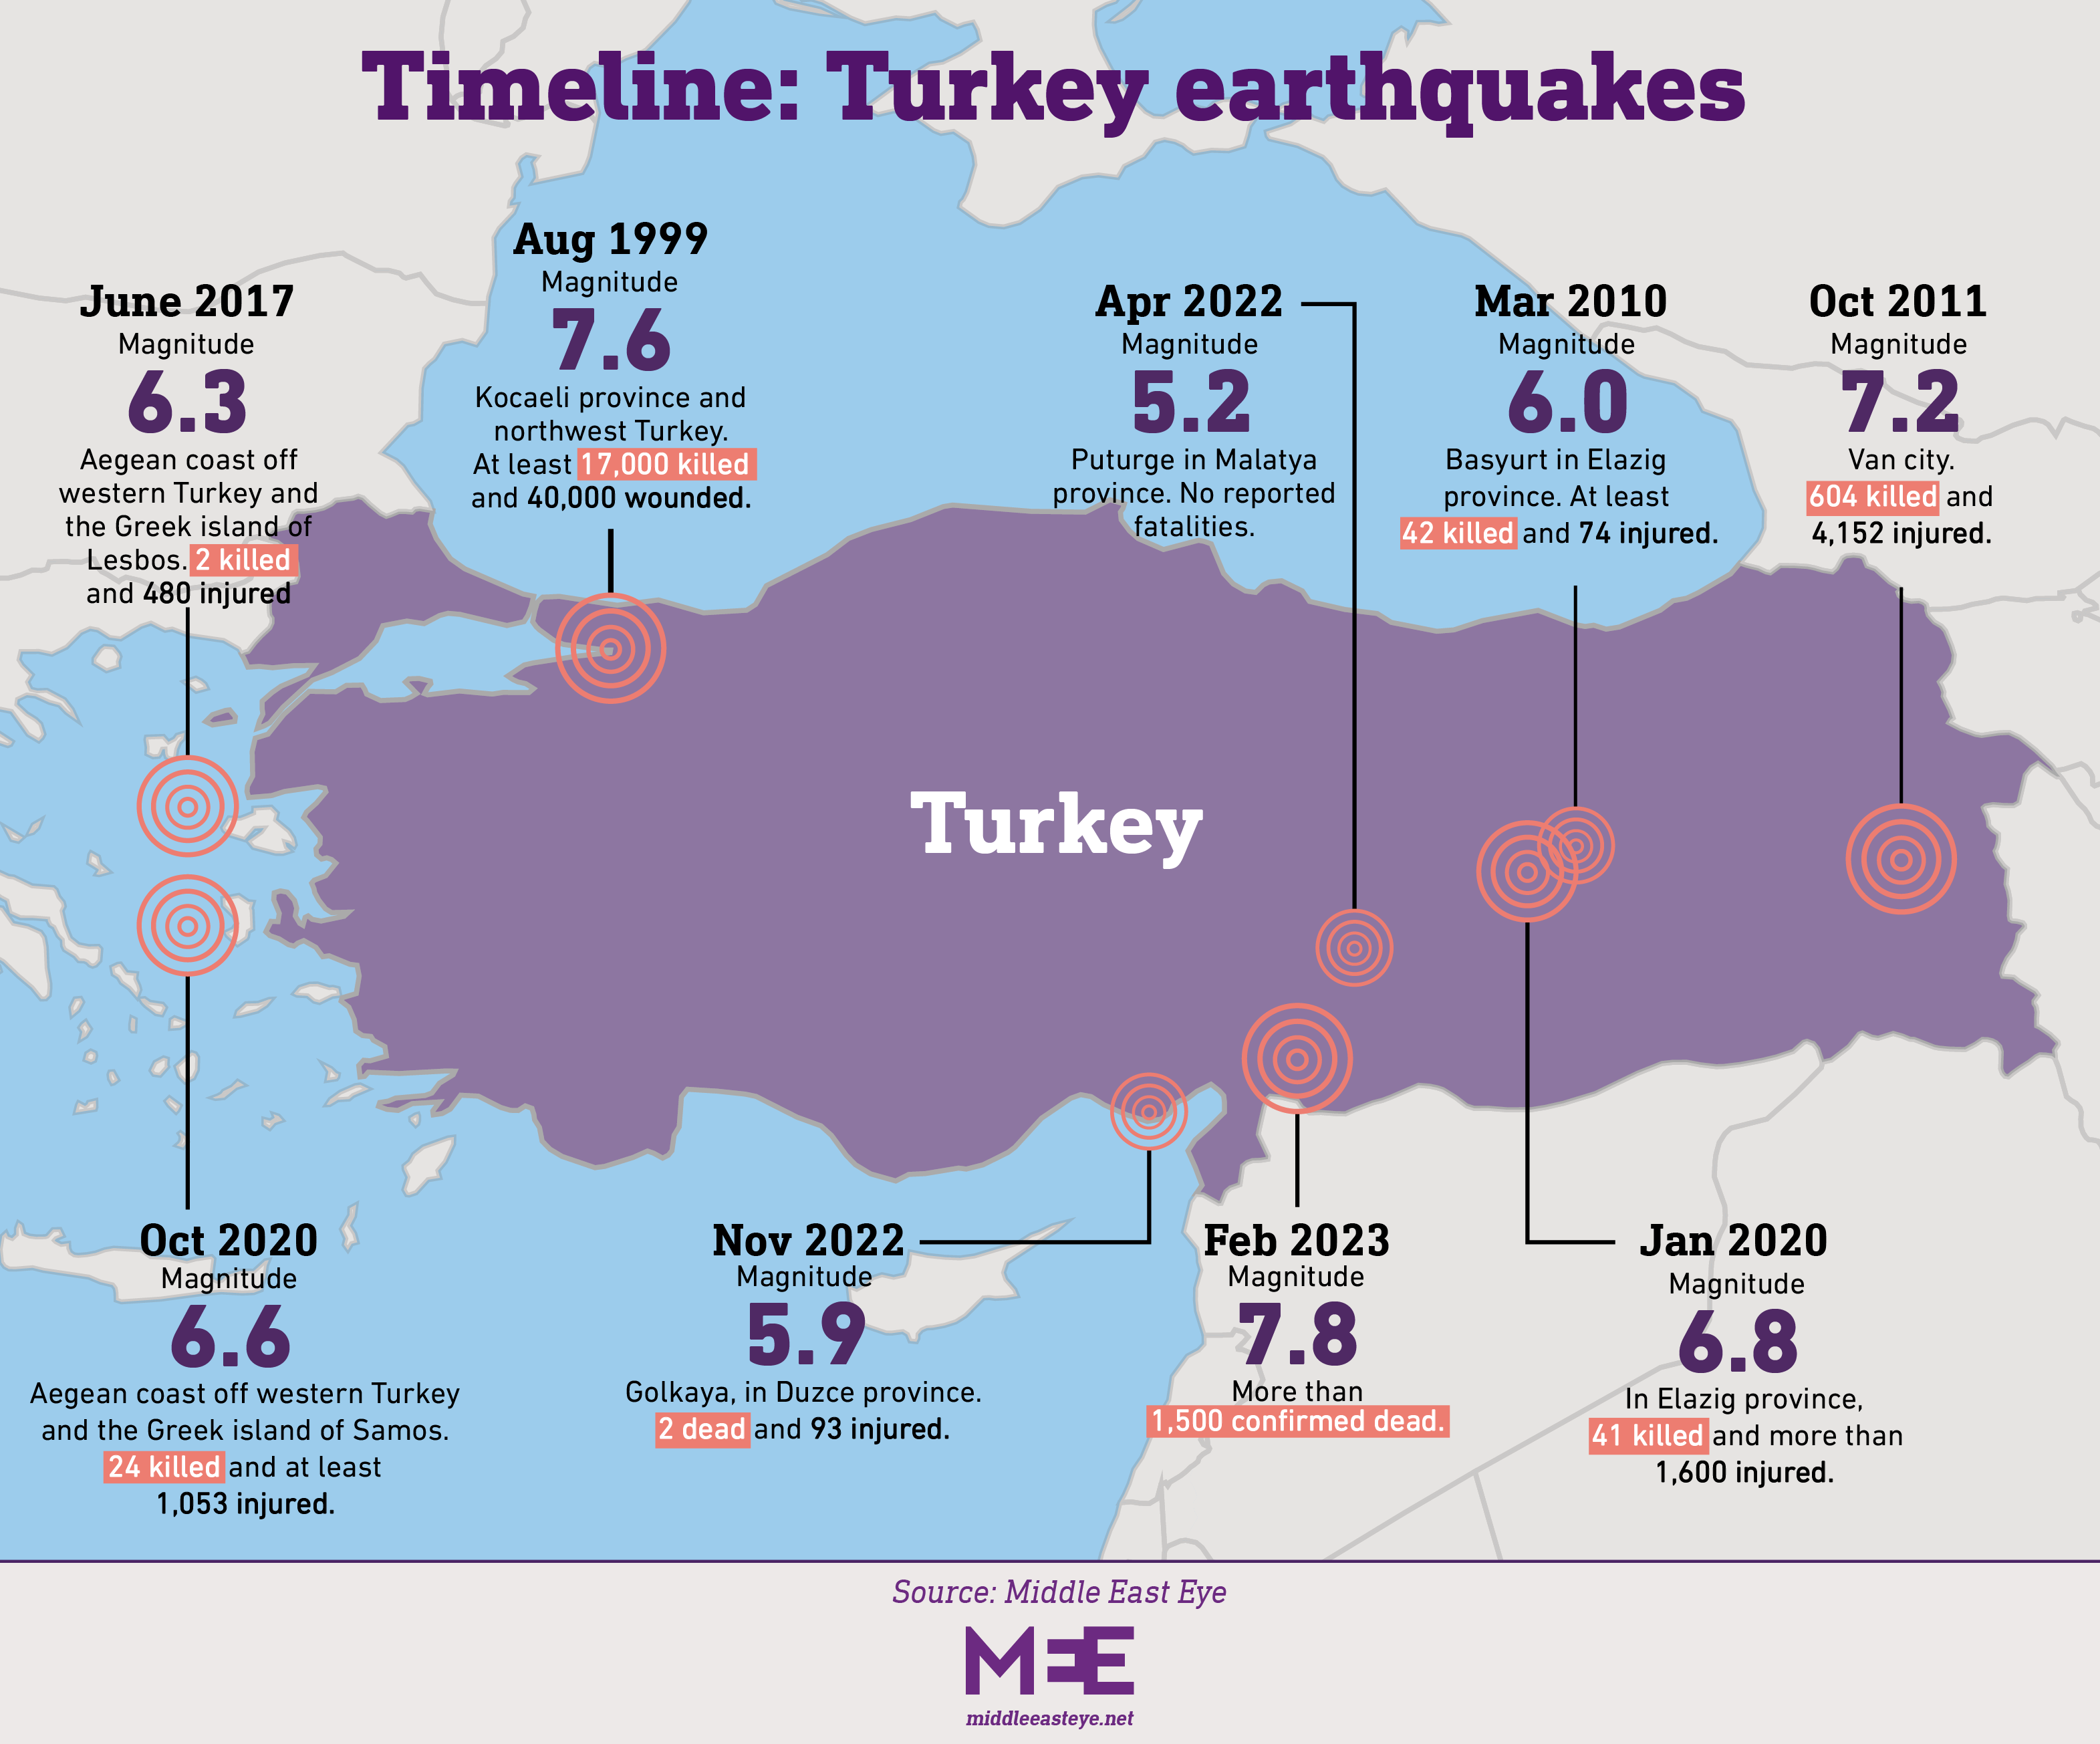 A map showing earthquakes that have taken place in Turkey over the past several decades.